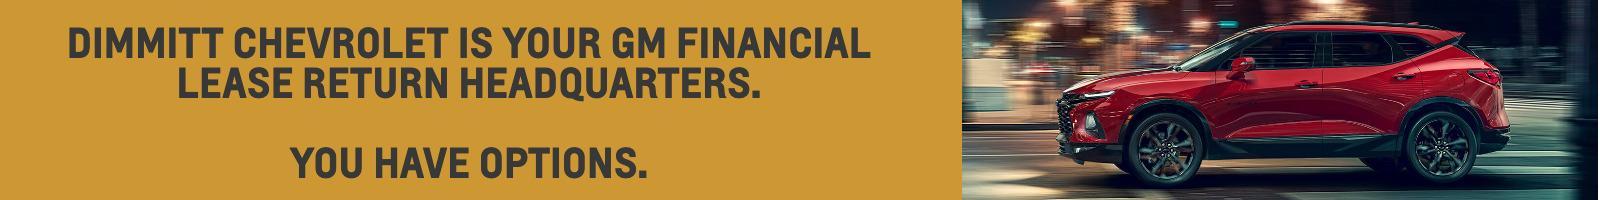 Dimmitt Chevrolet is your GM Financial Lease Return Headquarters. You have options.